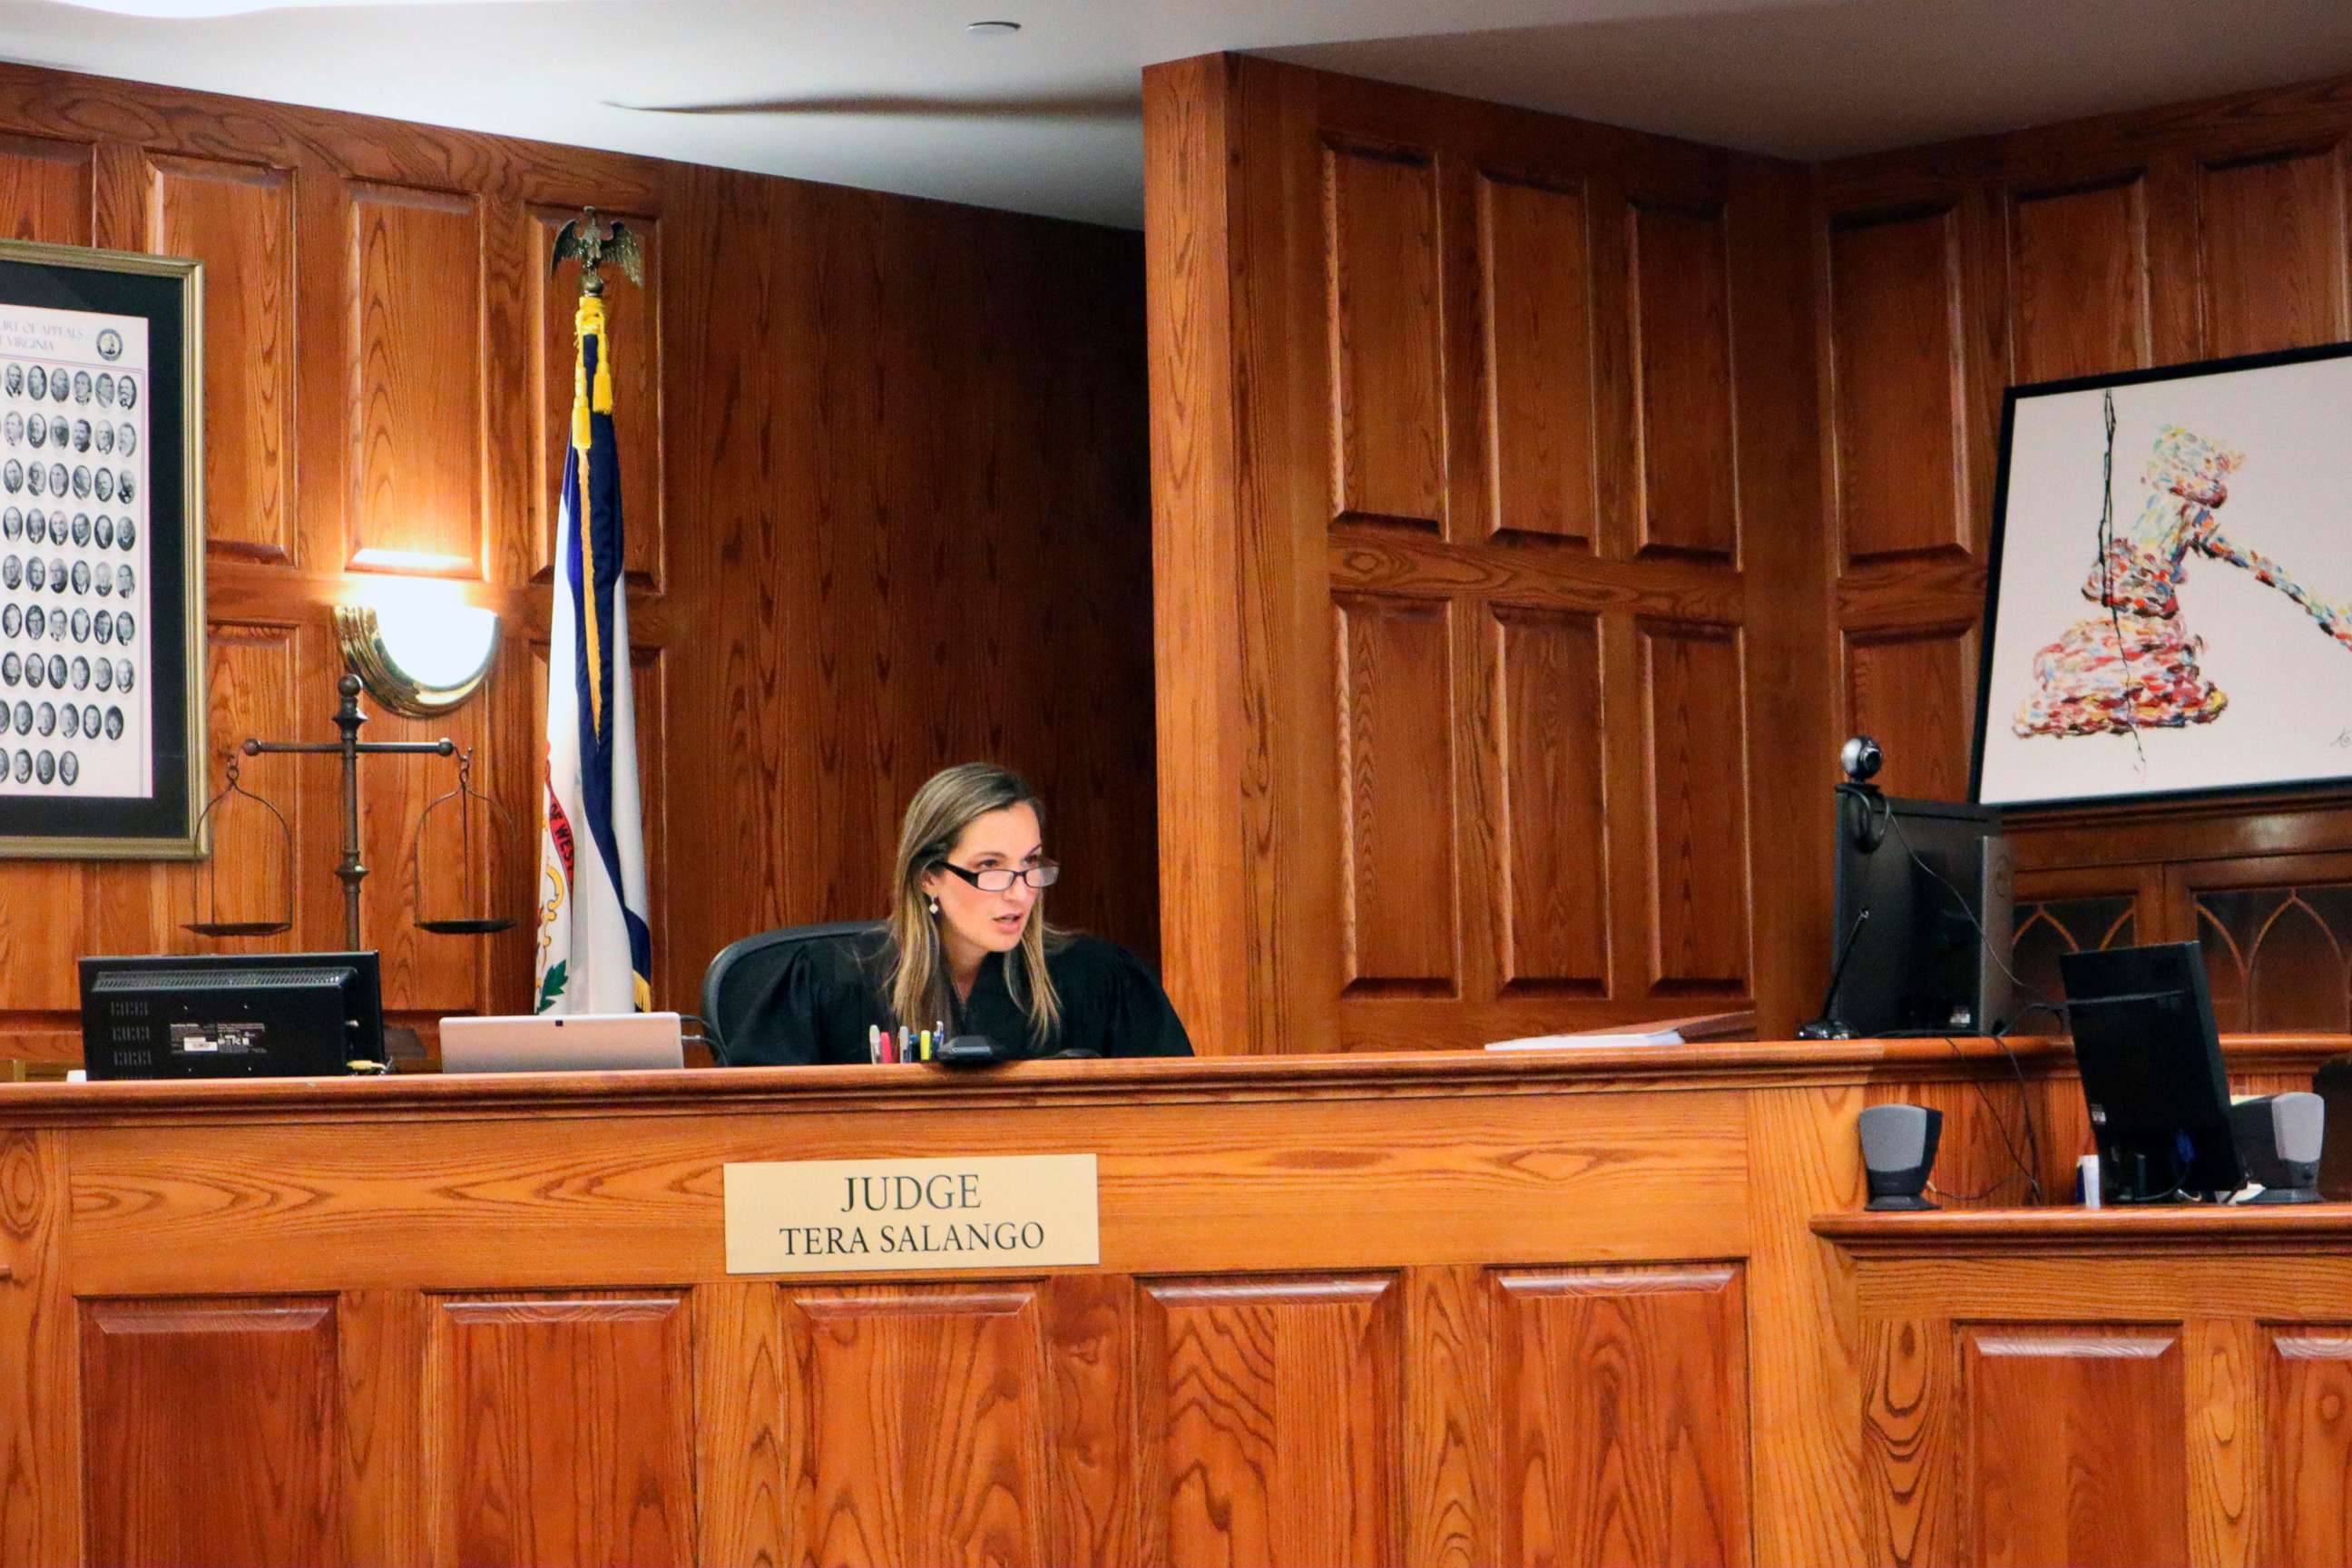 PHOTO: Judge Tera L. Salango presides from the bench in Kanawha County Circuit Court in Charleston, W.Va., July 18, 2022.